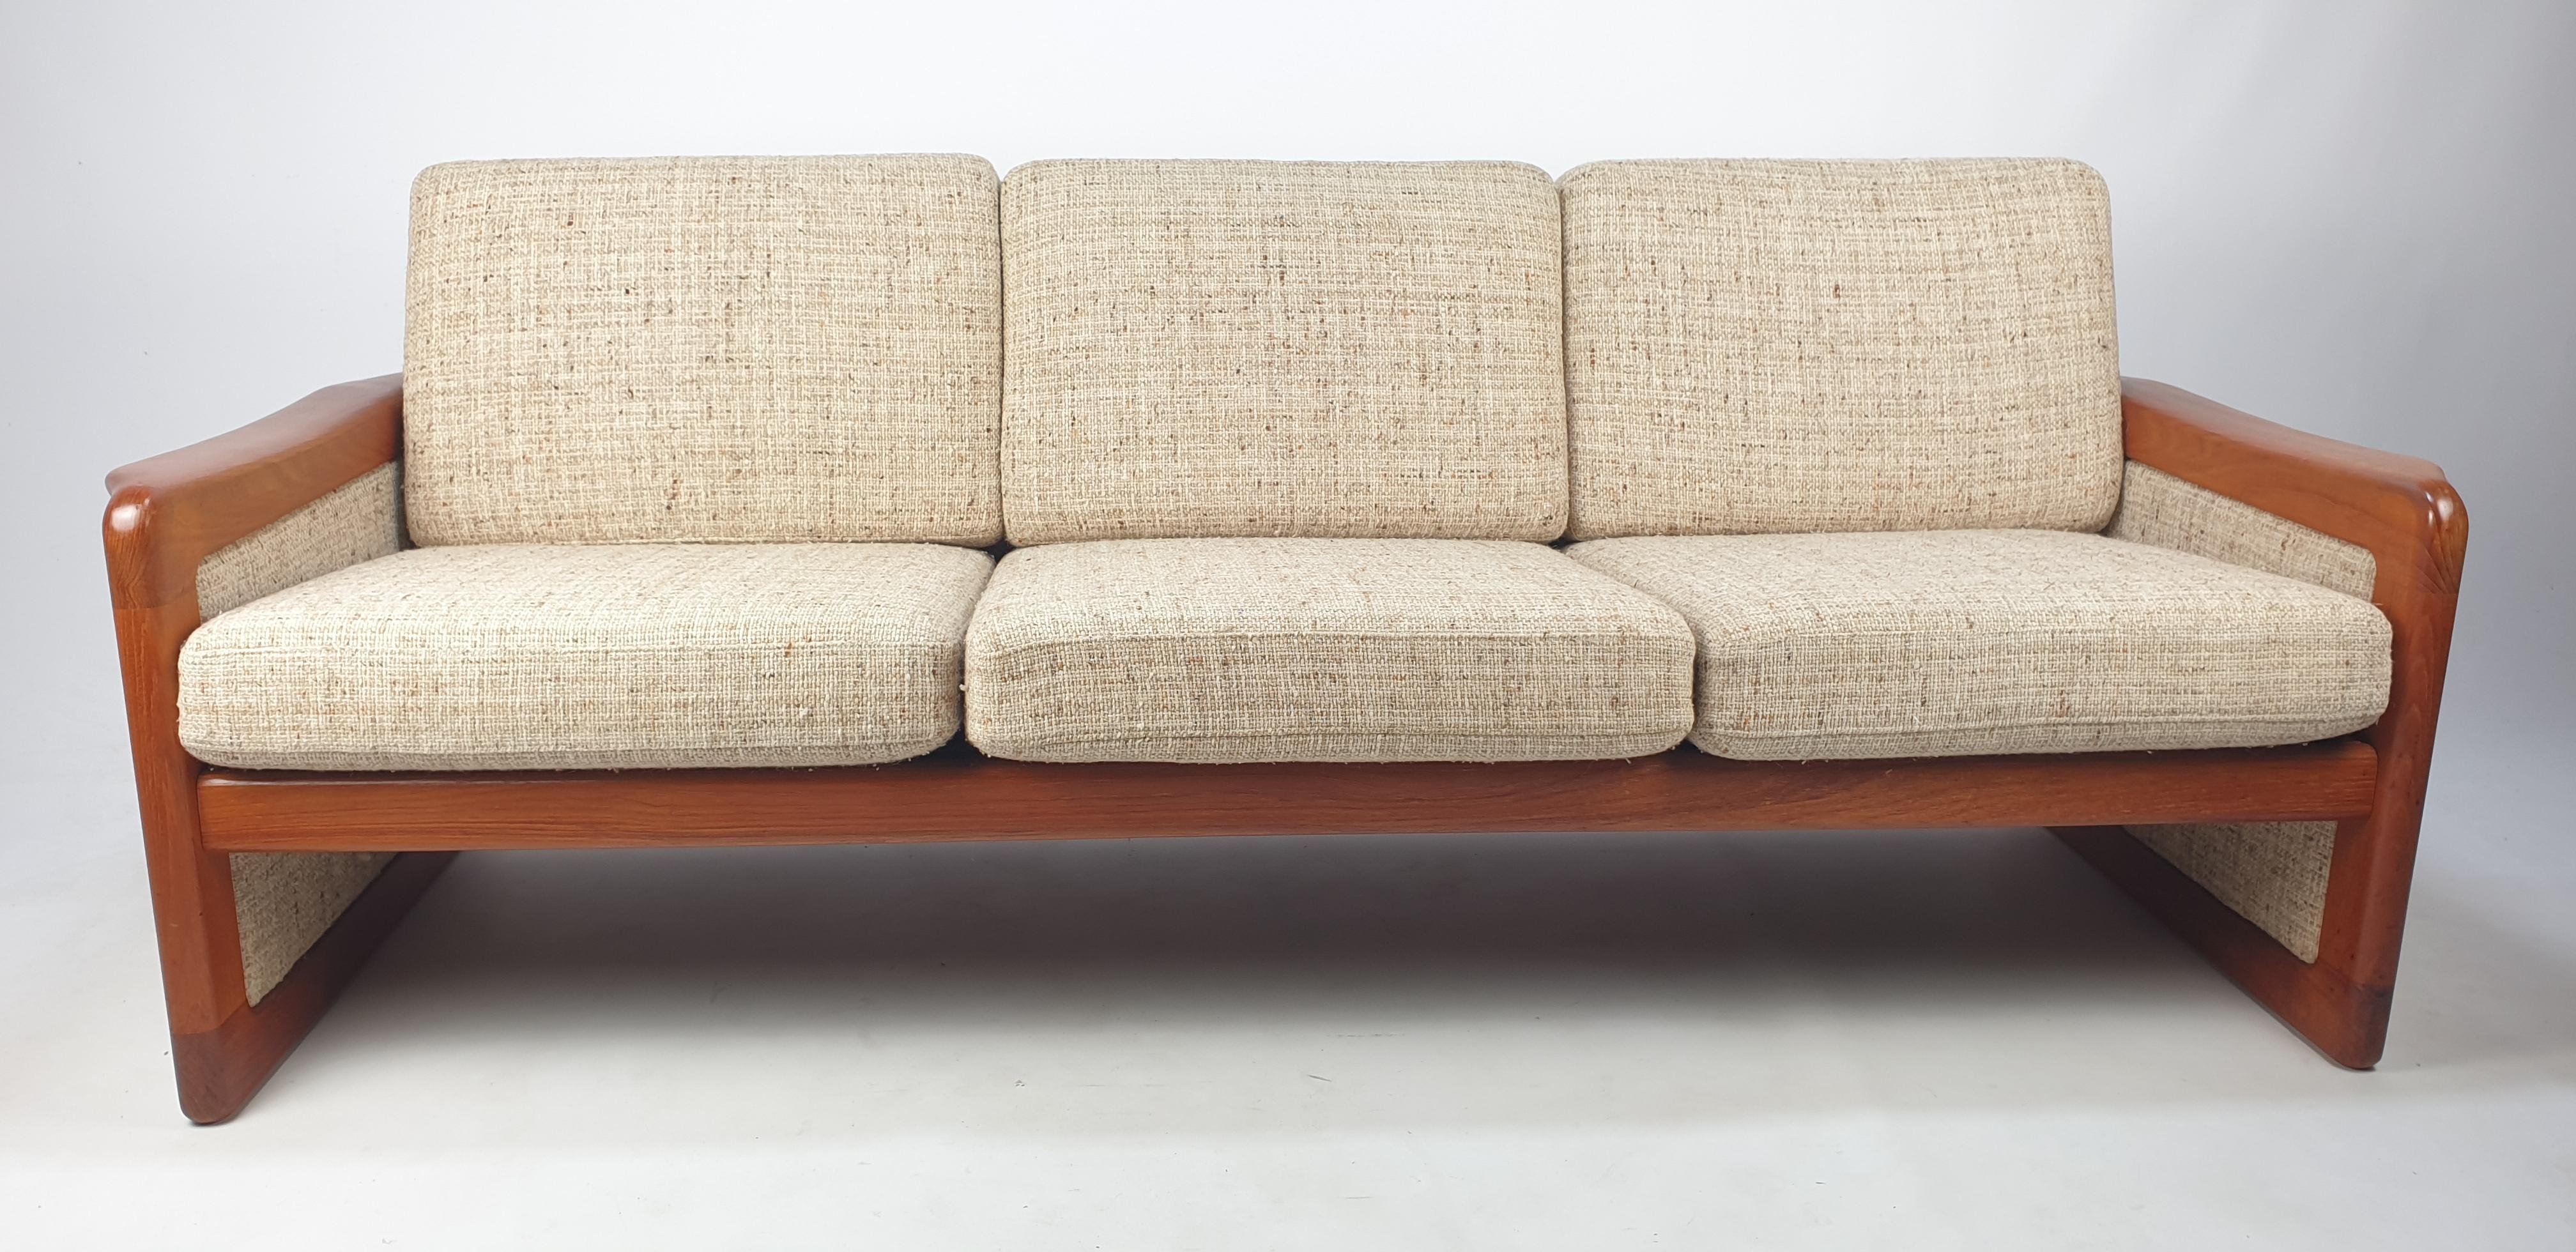 Original and stunning Danish sofa made in the 70's. Made of the best Scandinavian materials. A teak wood frame and sculpted armrests with organic shapes showing exceptional craftsmanship throughout the design. The original wool fabric is in good